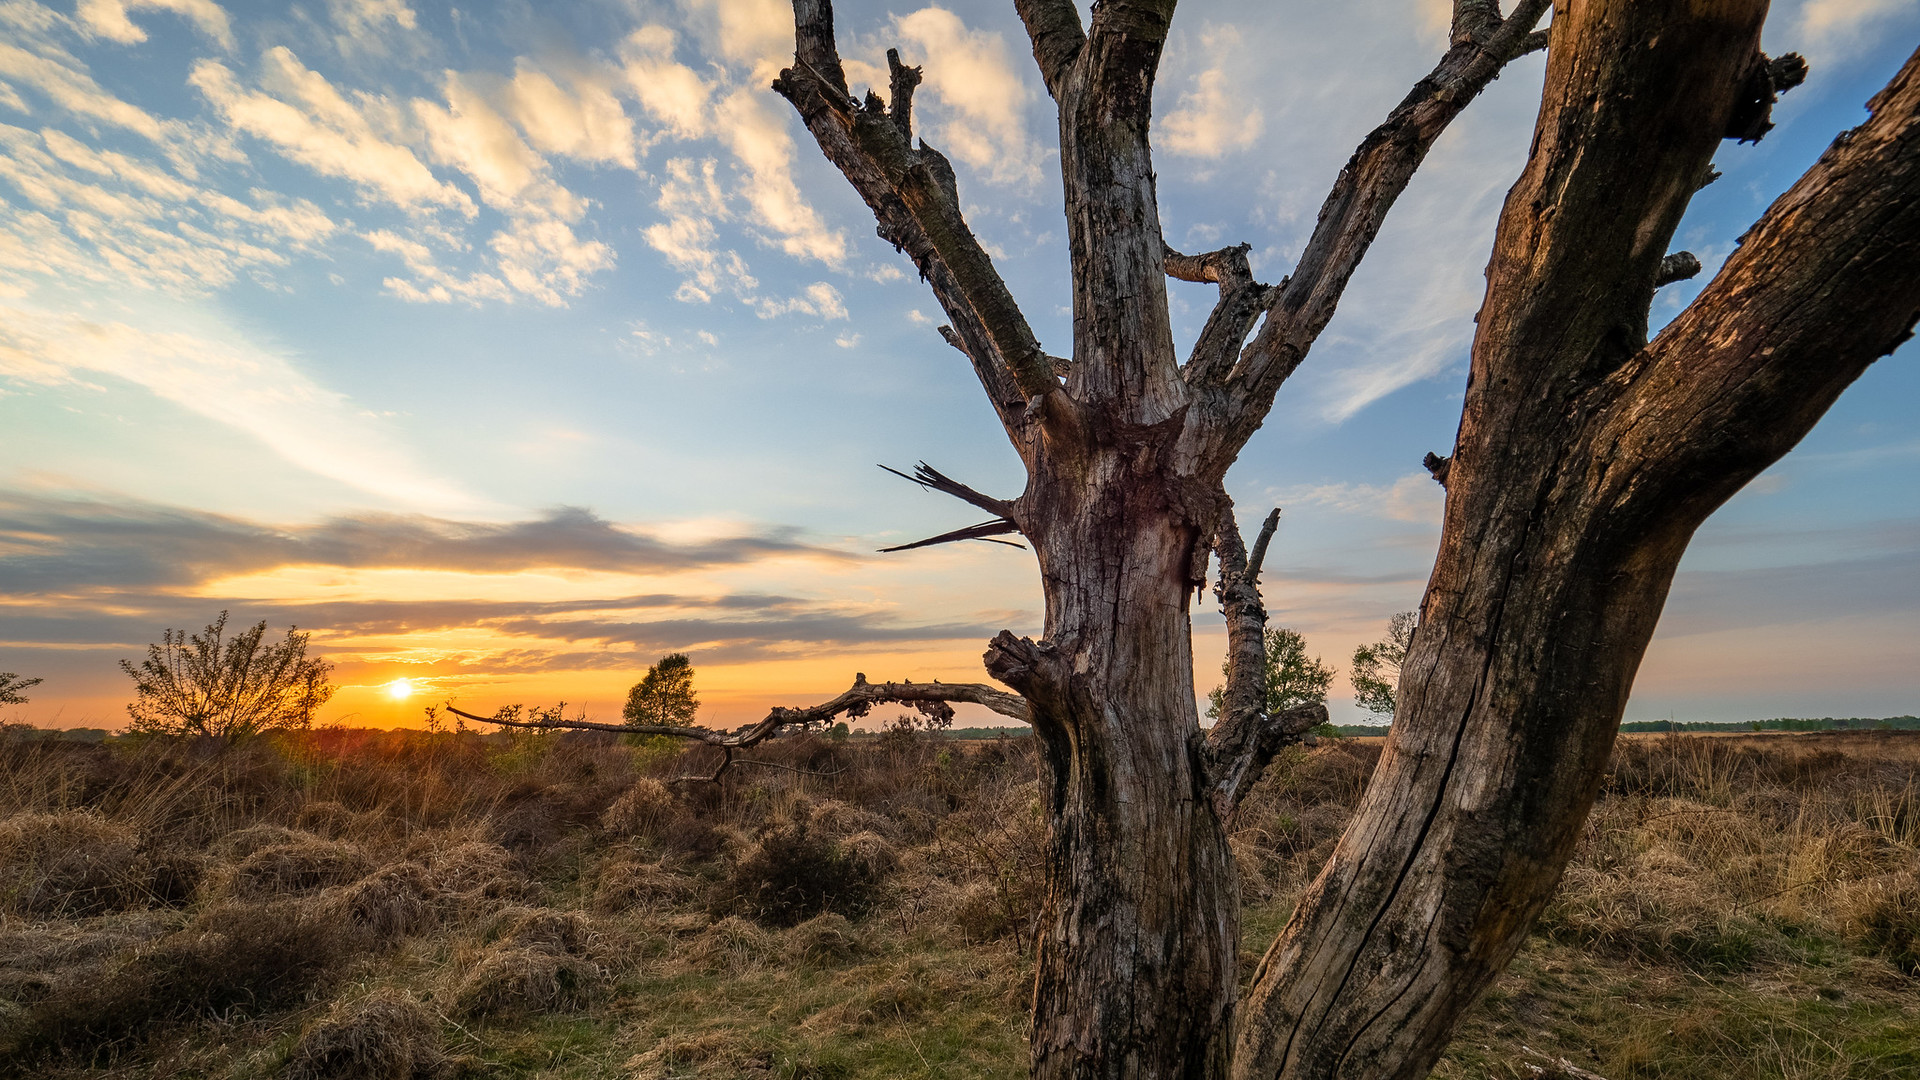 General 1920x1080 nature landscape sunset sky clouds tree trunk dry grass Netherlands dead trees